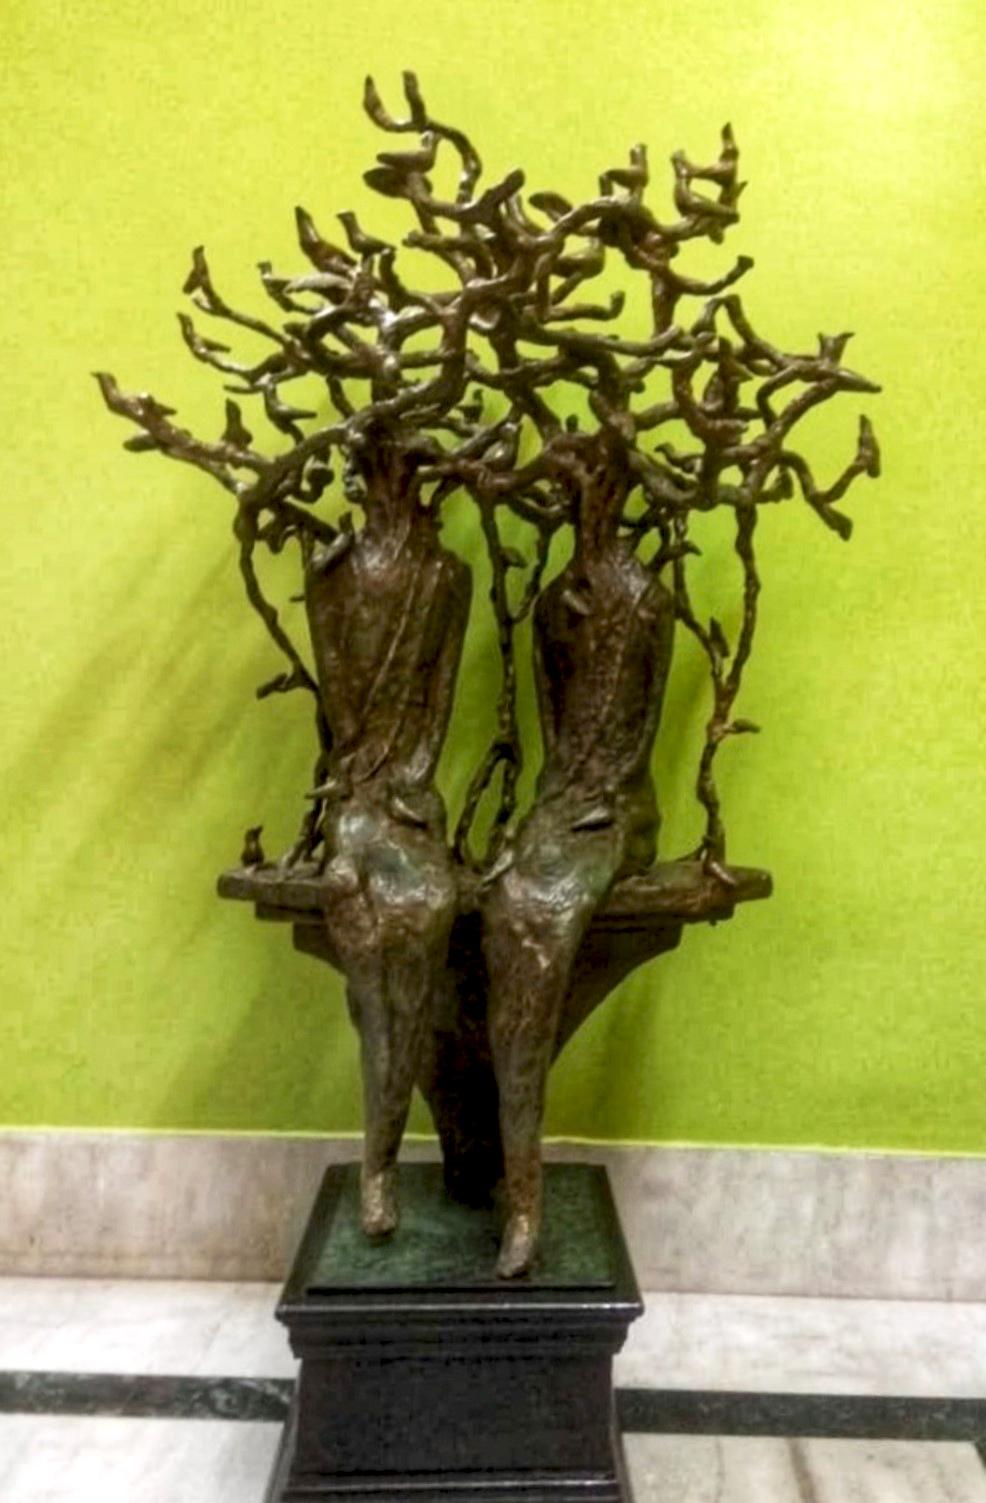 Tushar Kanti Das Roy
The green Tree
Bronze
Hight- 34 inch, length- 24 inch, Depth- 14 inch

About the Artist & his work :
Born : 1968.
Education : He has completed his education from I.C.Art & Craft at Kolkata.

Exhibition : He has participated in